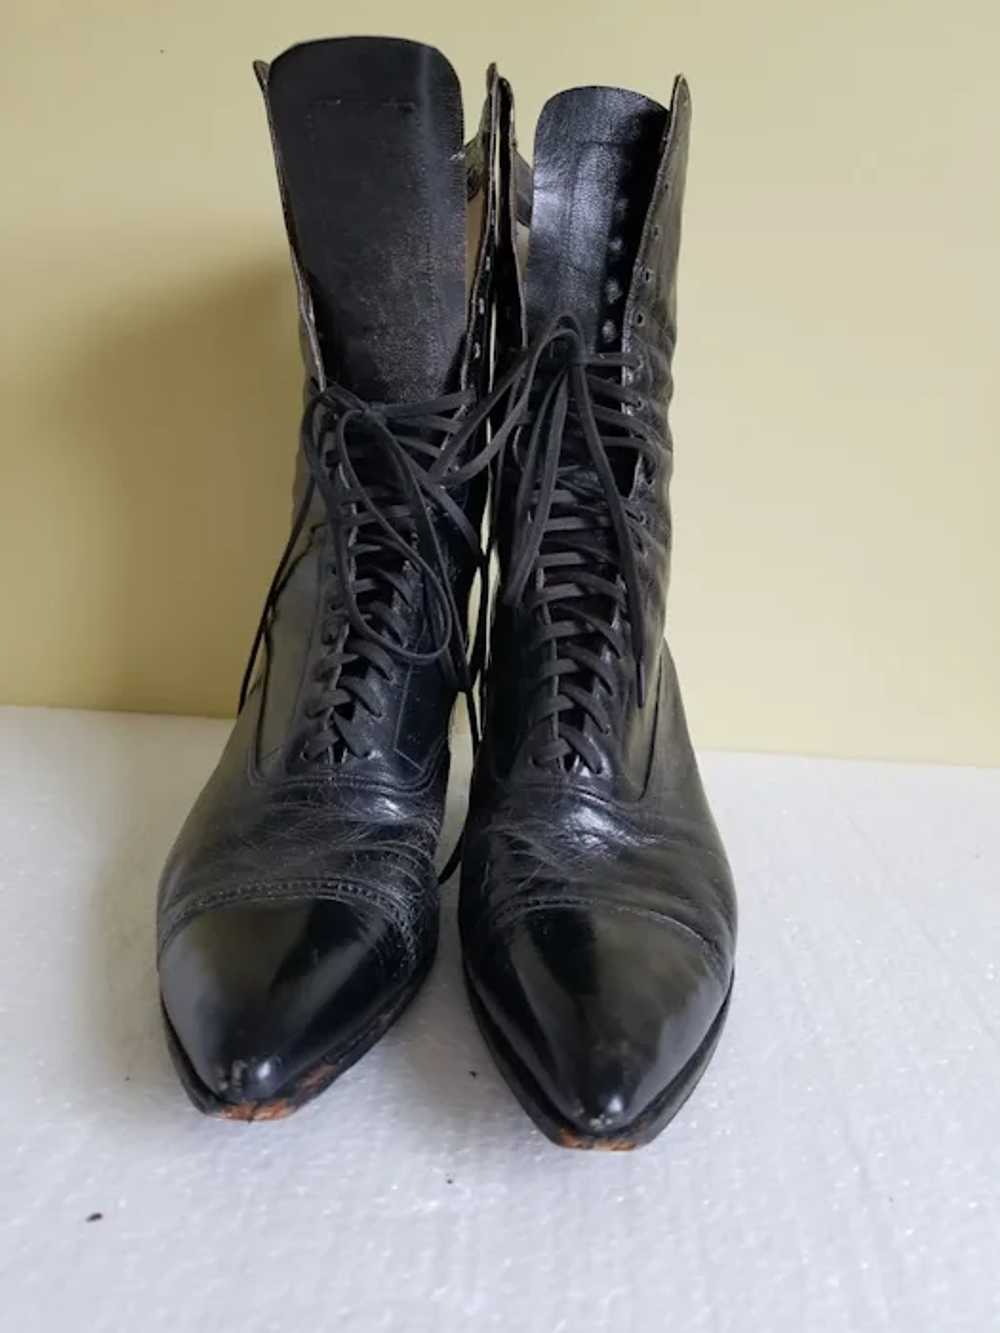 Gorgeous 1900's Ladies Black Leather Lace Up Boots - image 4